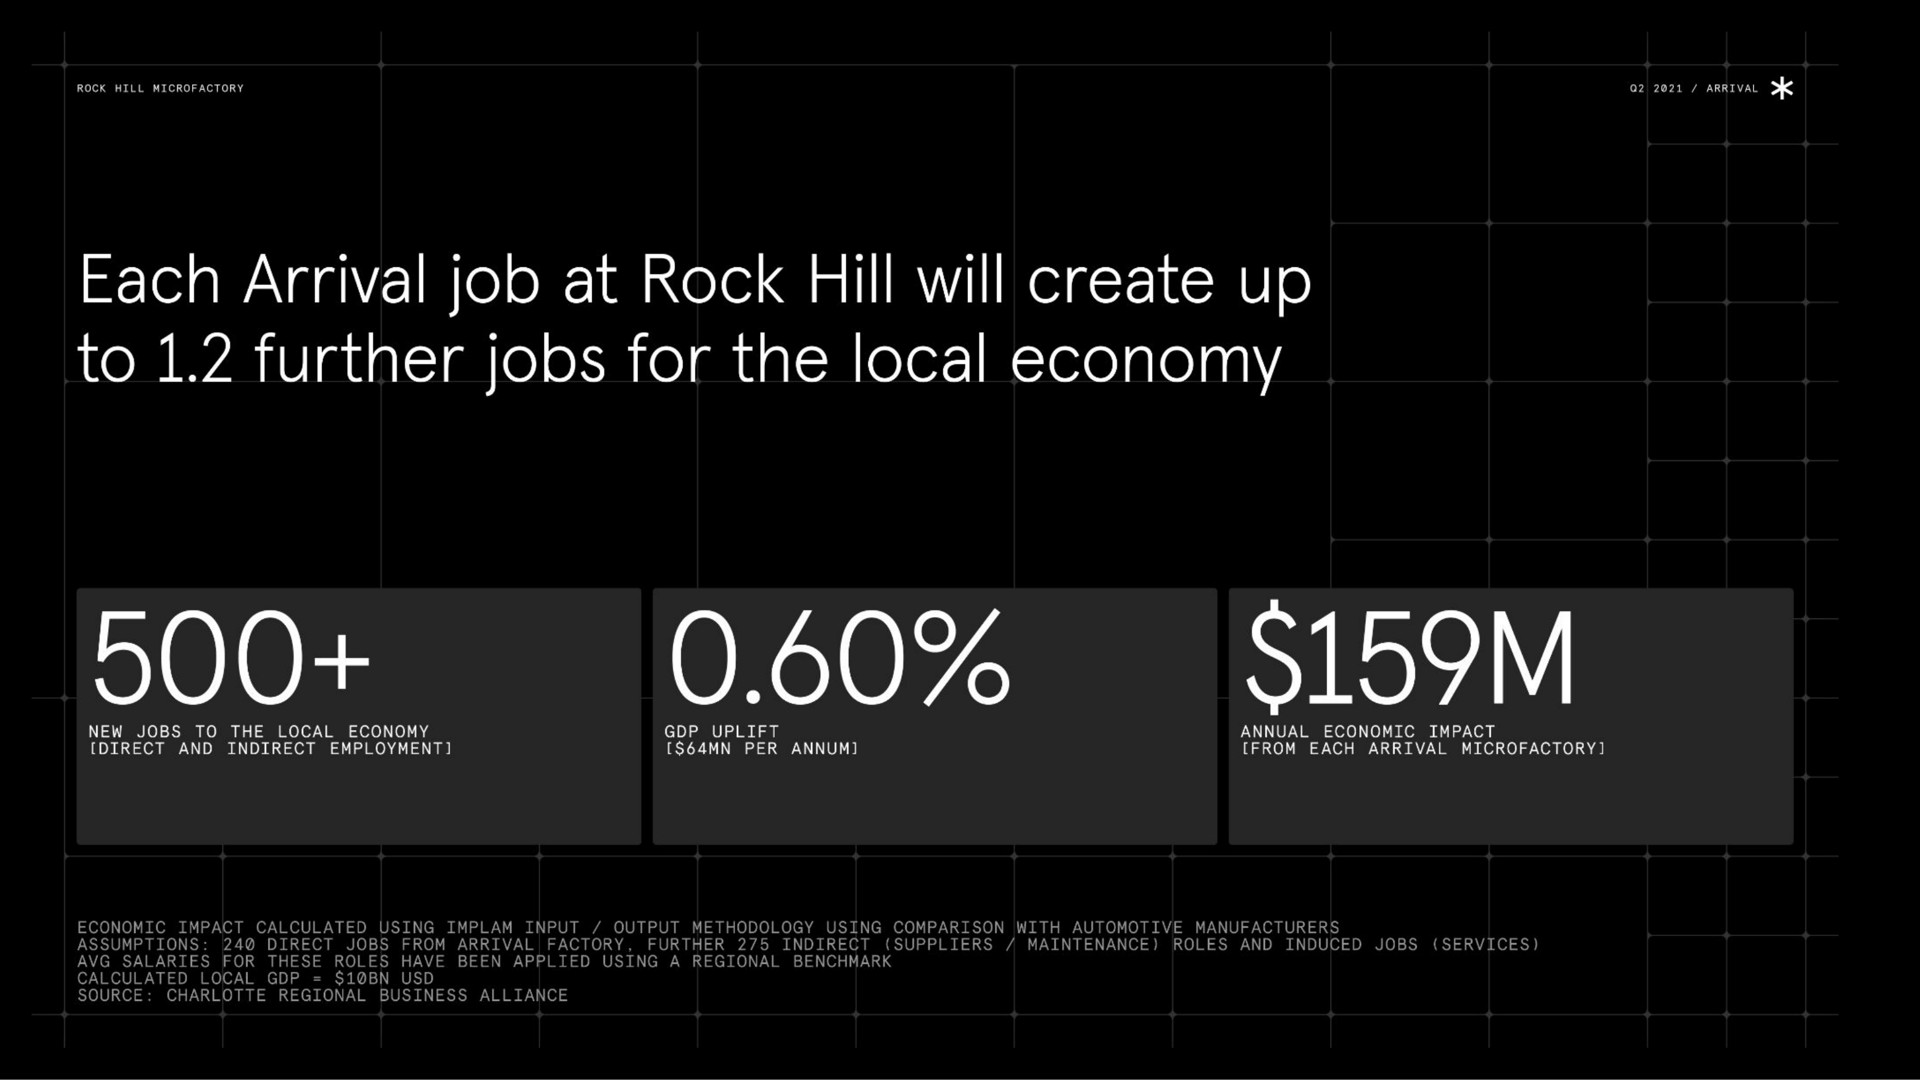 each arrival job at rock hill will create up to further jobs for the local economy new jobs to the local economy direct and indirect employment per annual economic impact from each arrival economic impact calculated using input output methodology using comparison with automotive manufacturers assumptions direct jobs from arrival factory salaries for these roles have been applied using a regional calculated local source regional business alliance further indirect suppliers maintenance roles and induced jobs services | Arrival